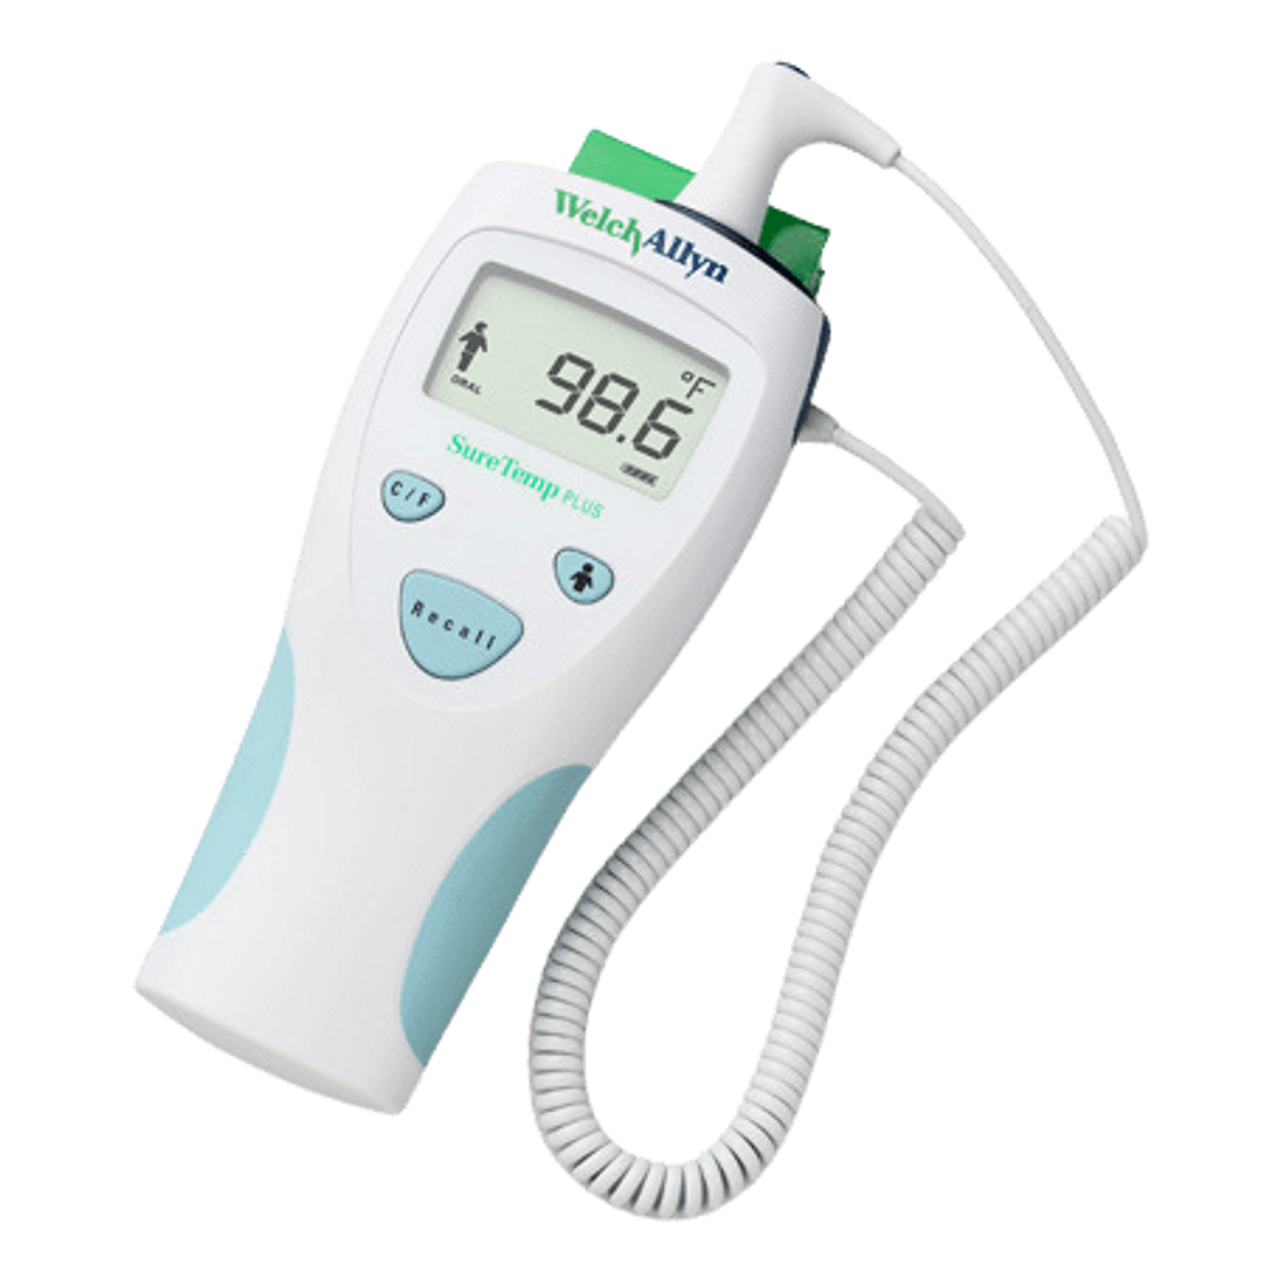 Welch Allyn SureTemp Plus 692 Electronic Thermometer - Oral, 9-ft. 01692-300